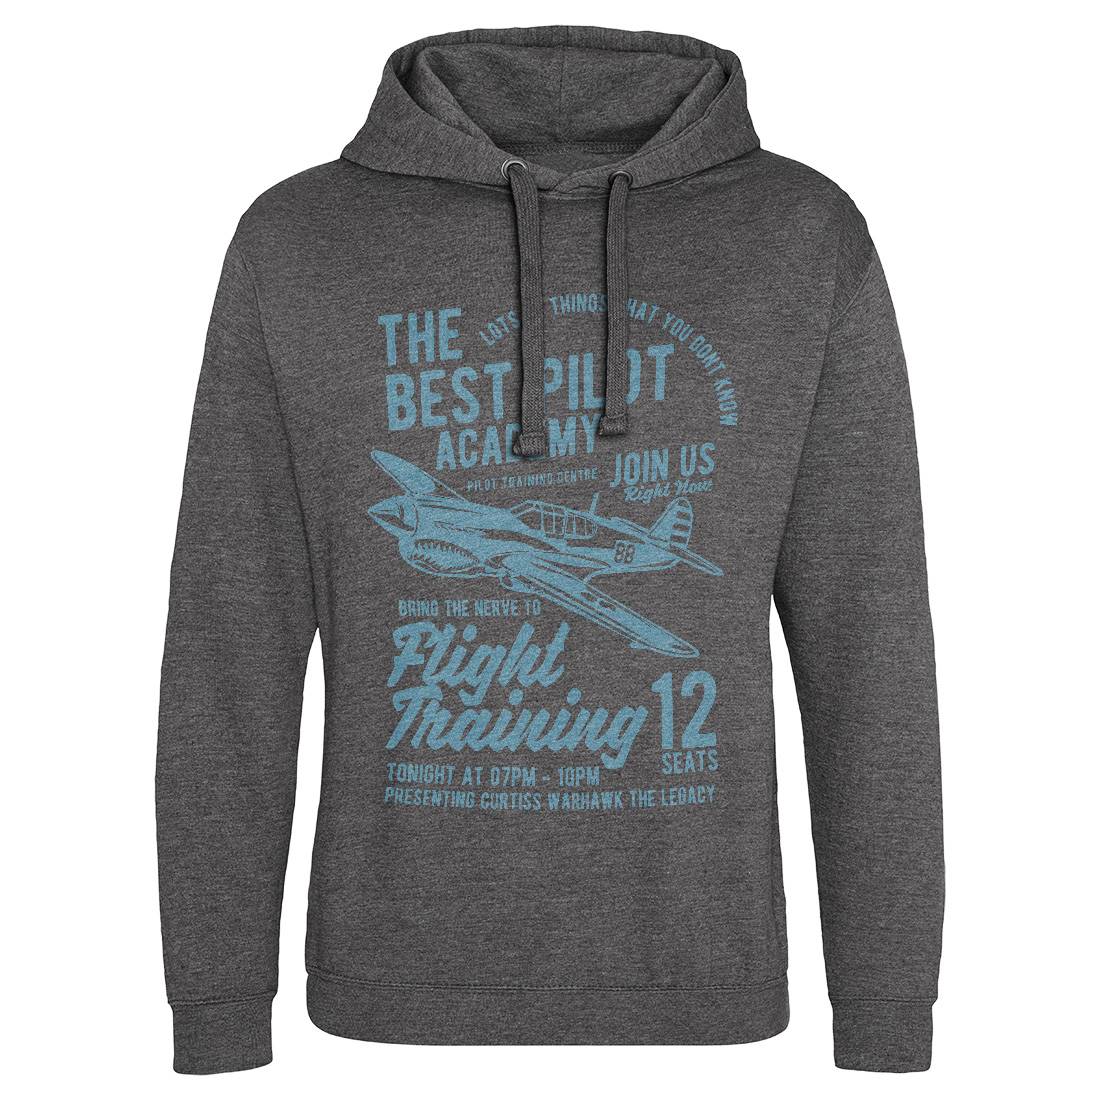 Flight Training Mens Hoodie Without Pocket Vehicles B209